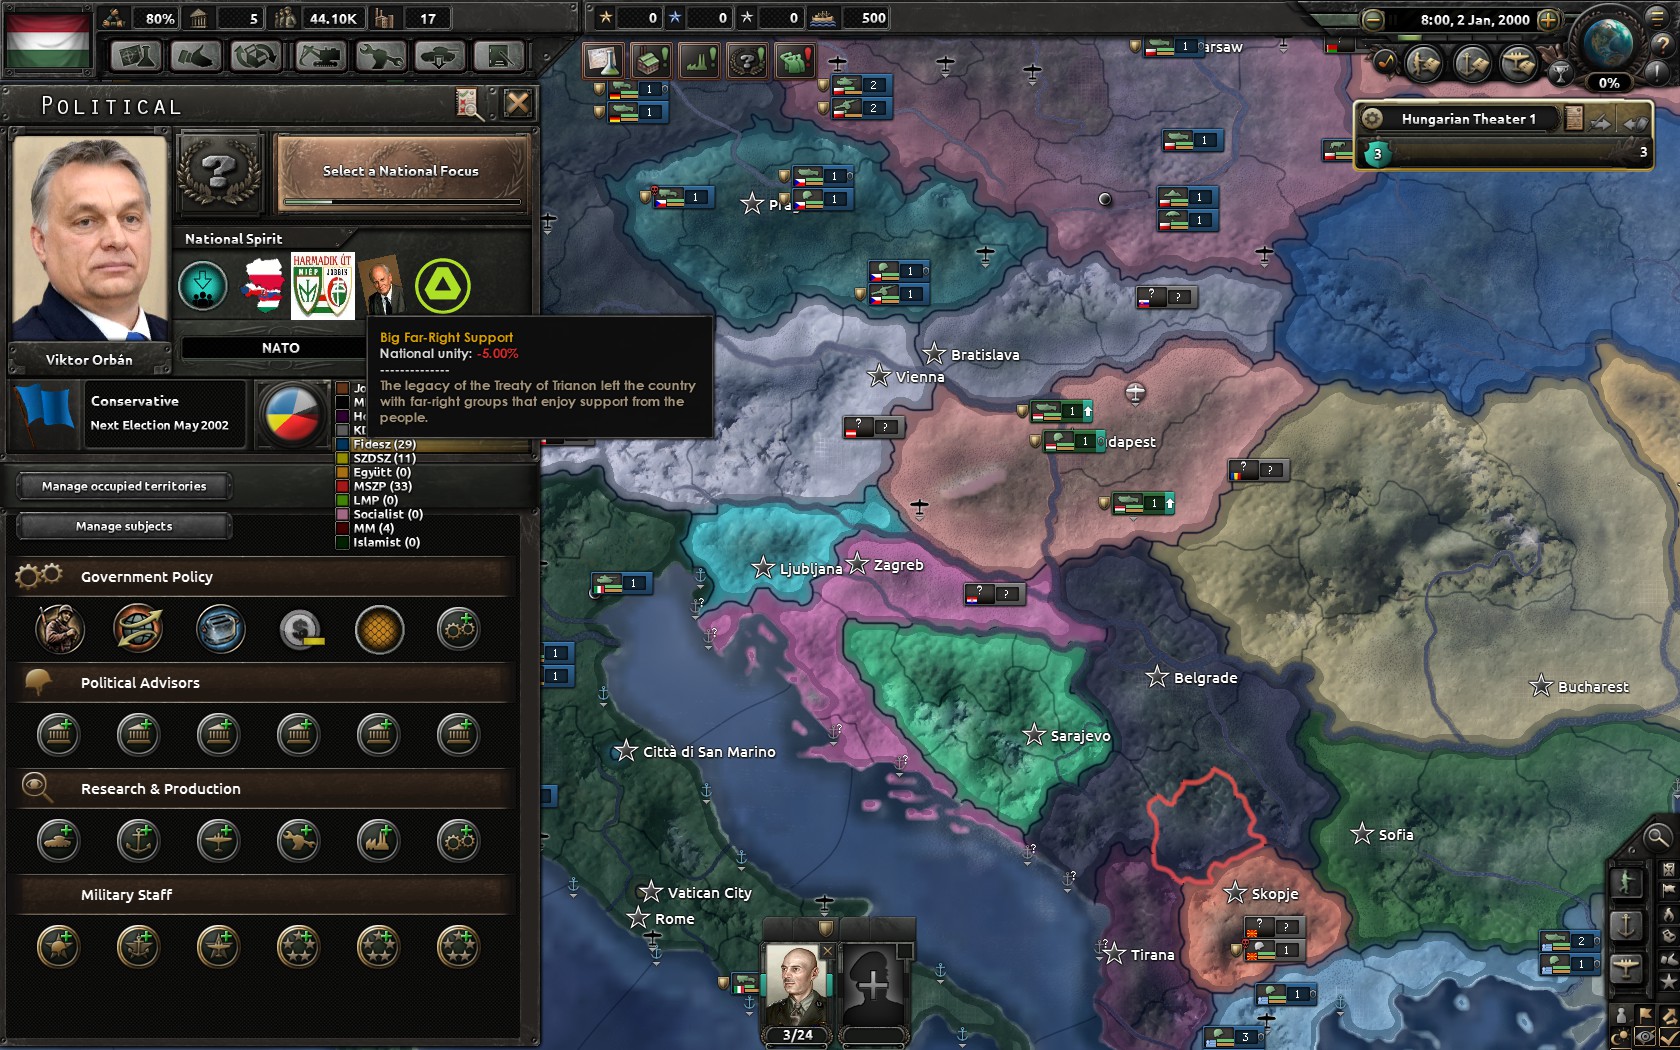 hearts of iron 4 country tags